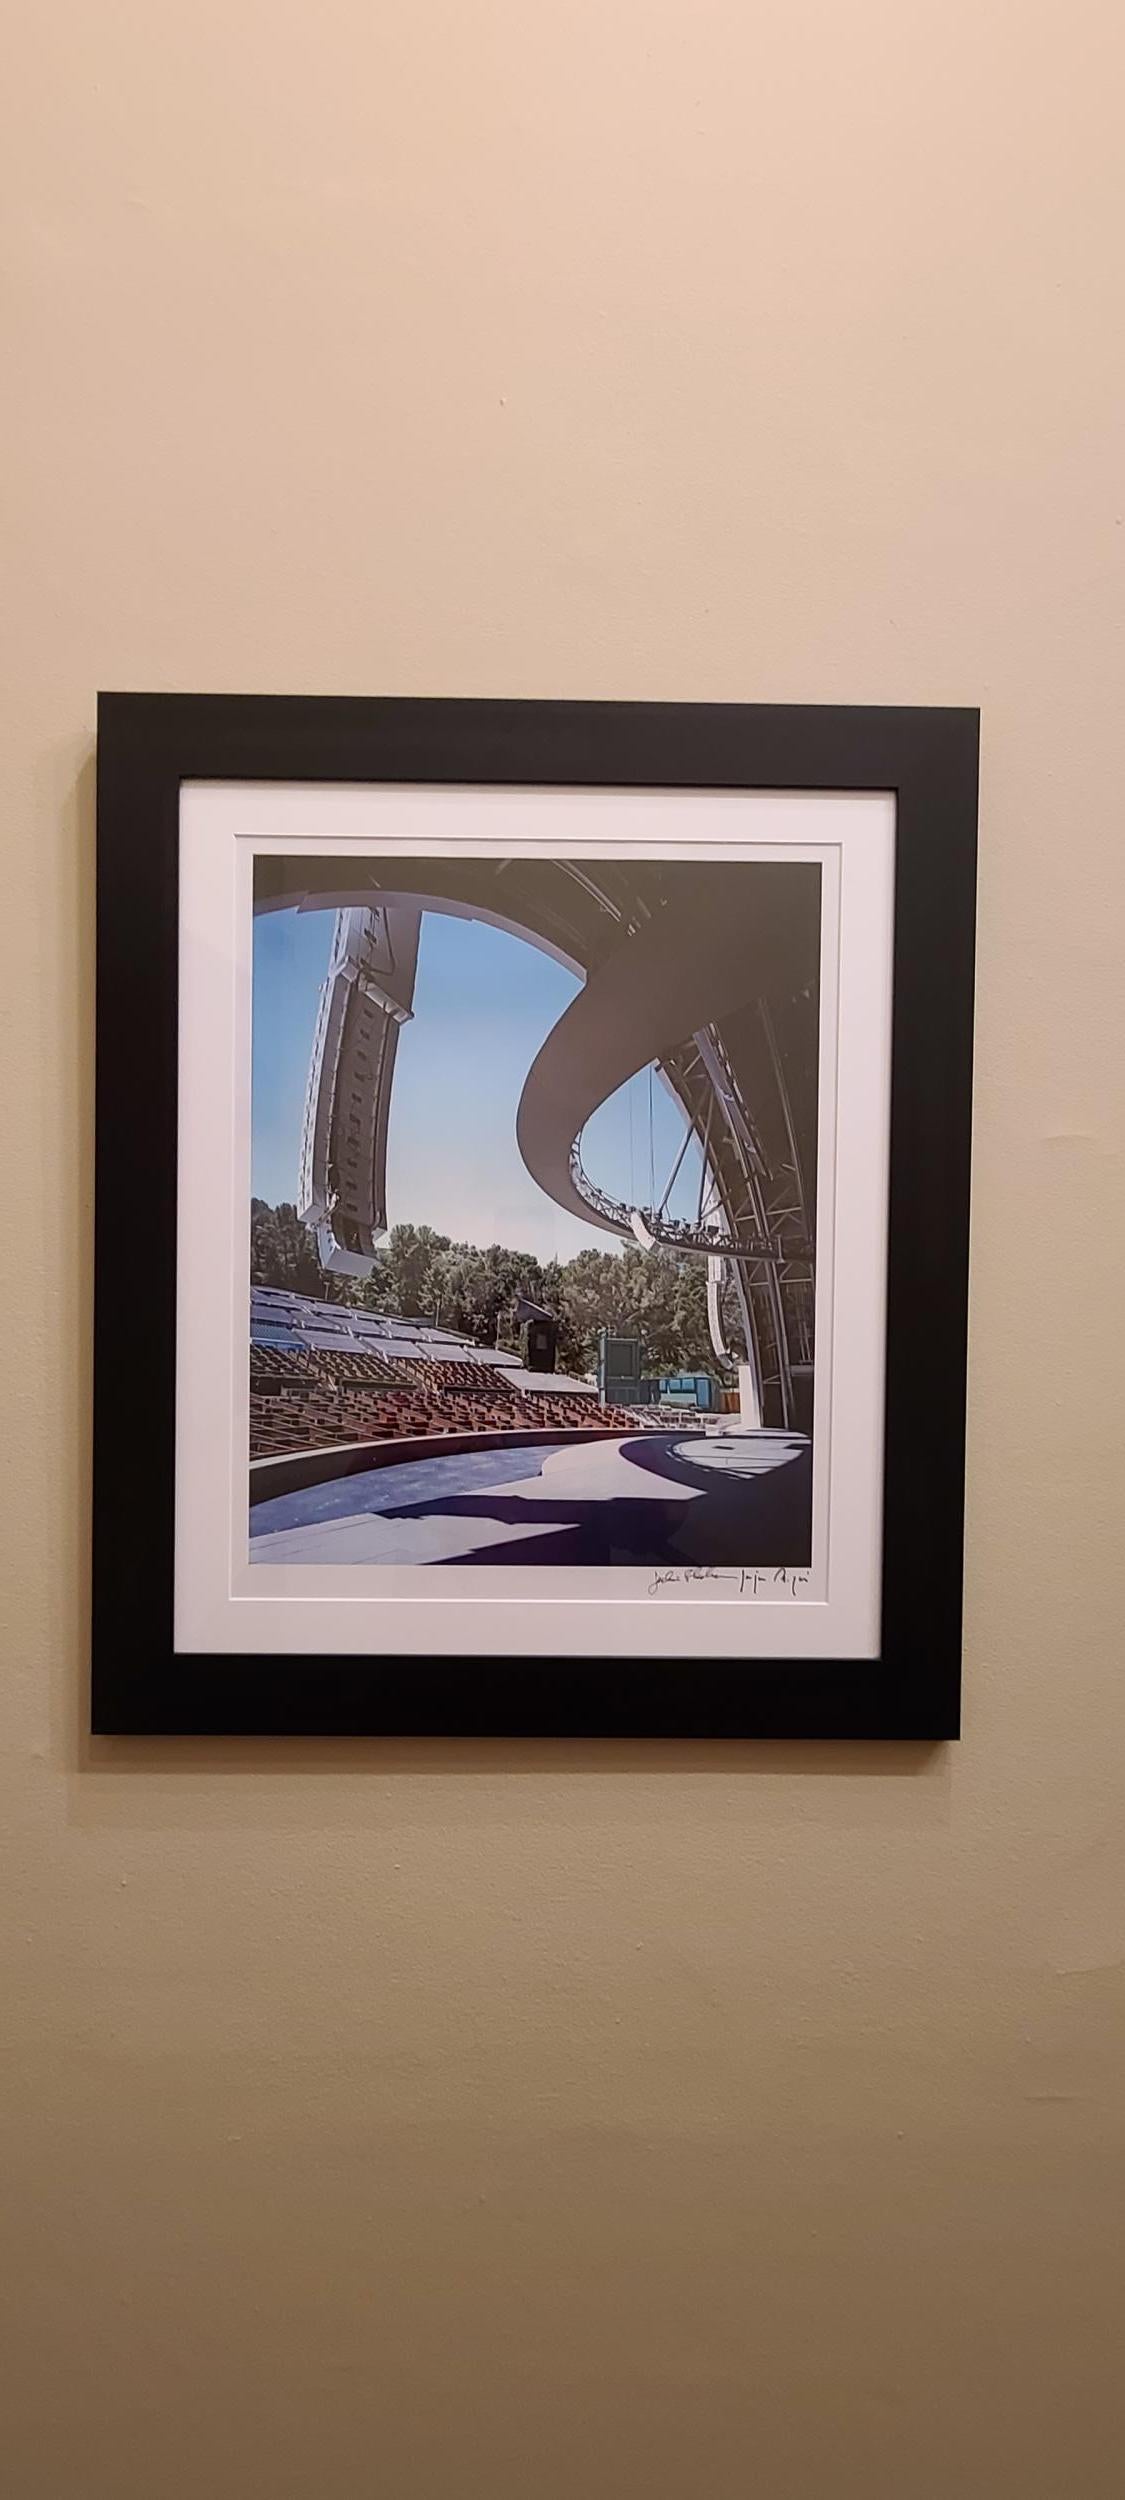 Original untitled color chromogenic photographic print of the Hollywood Bowl under renovations by photographer Julius Shulman, signed. Framed in a black wood frame. 

This was a small limited edition and photographed for a fundraiser for the